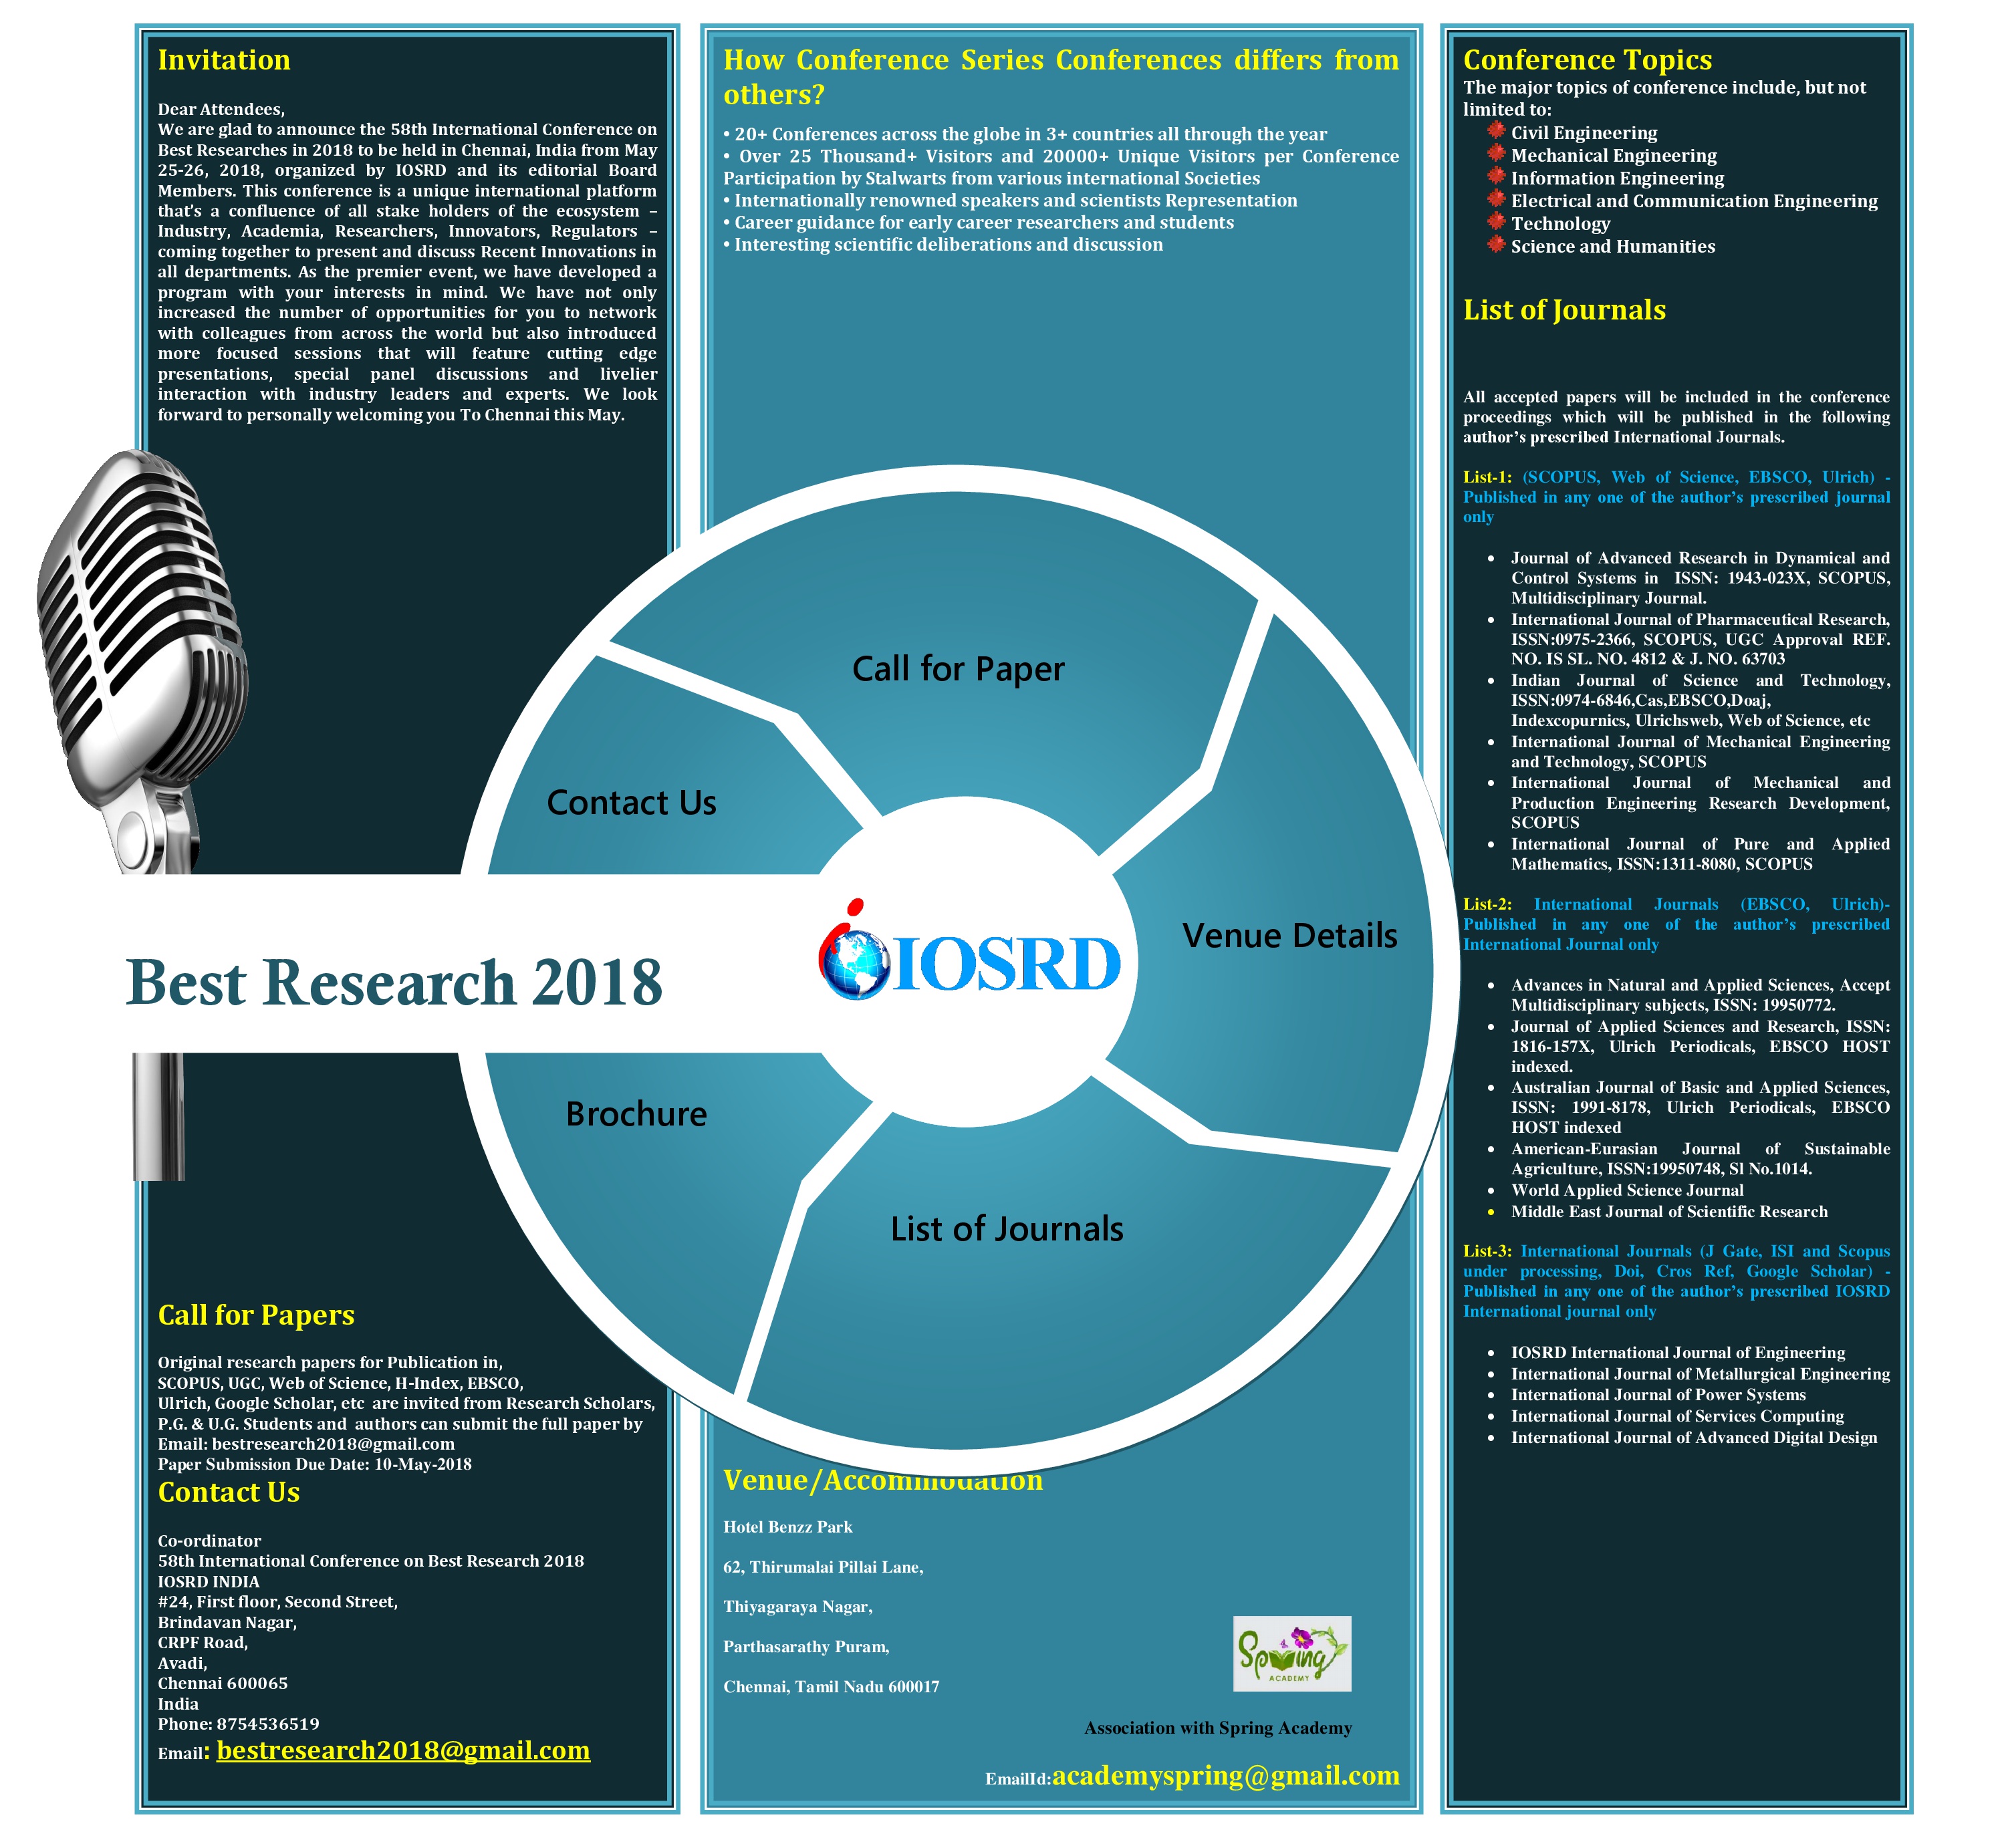 58th International Conference on Best Researches in 2018